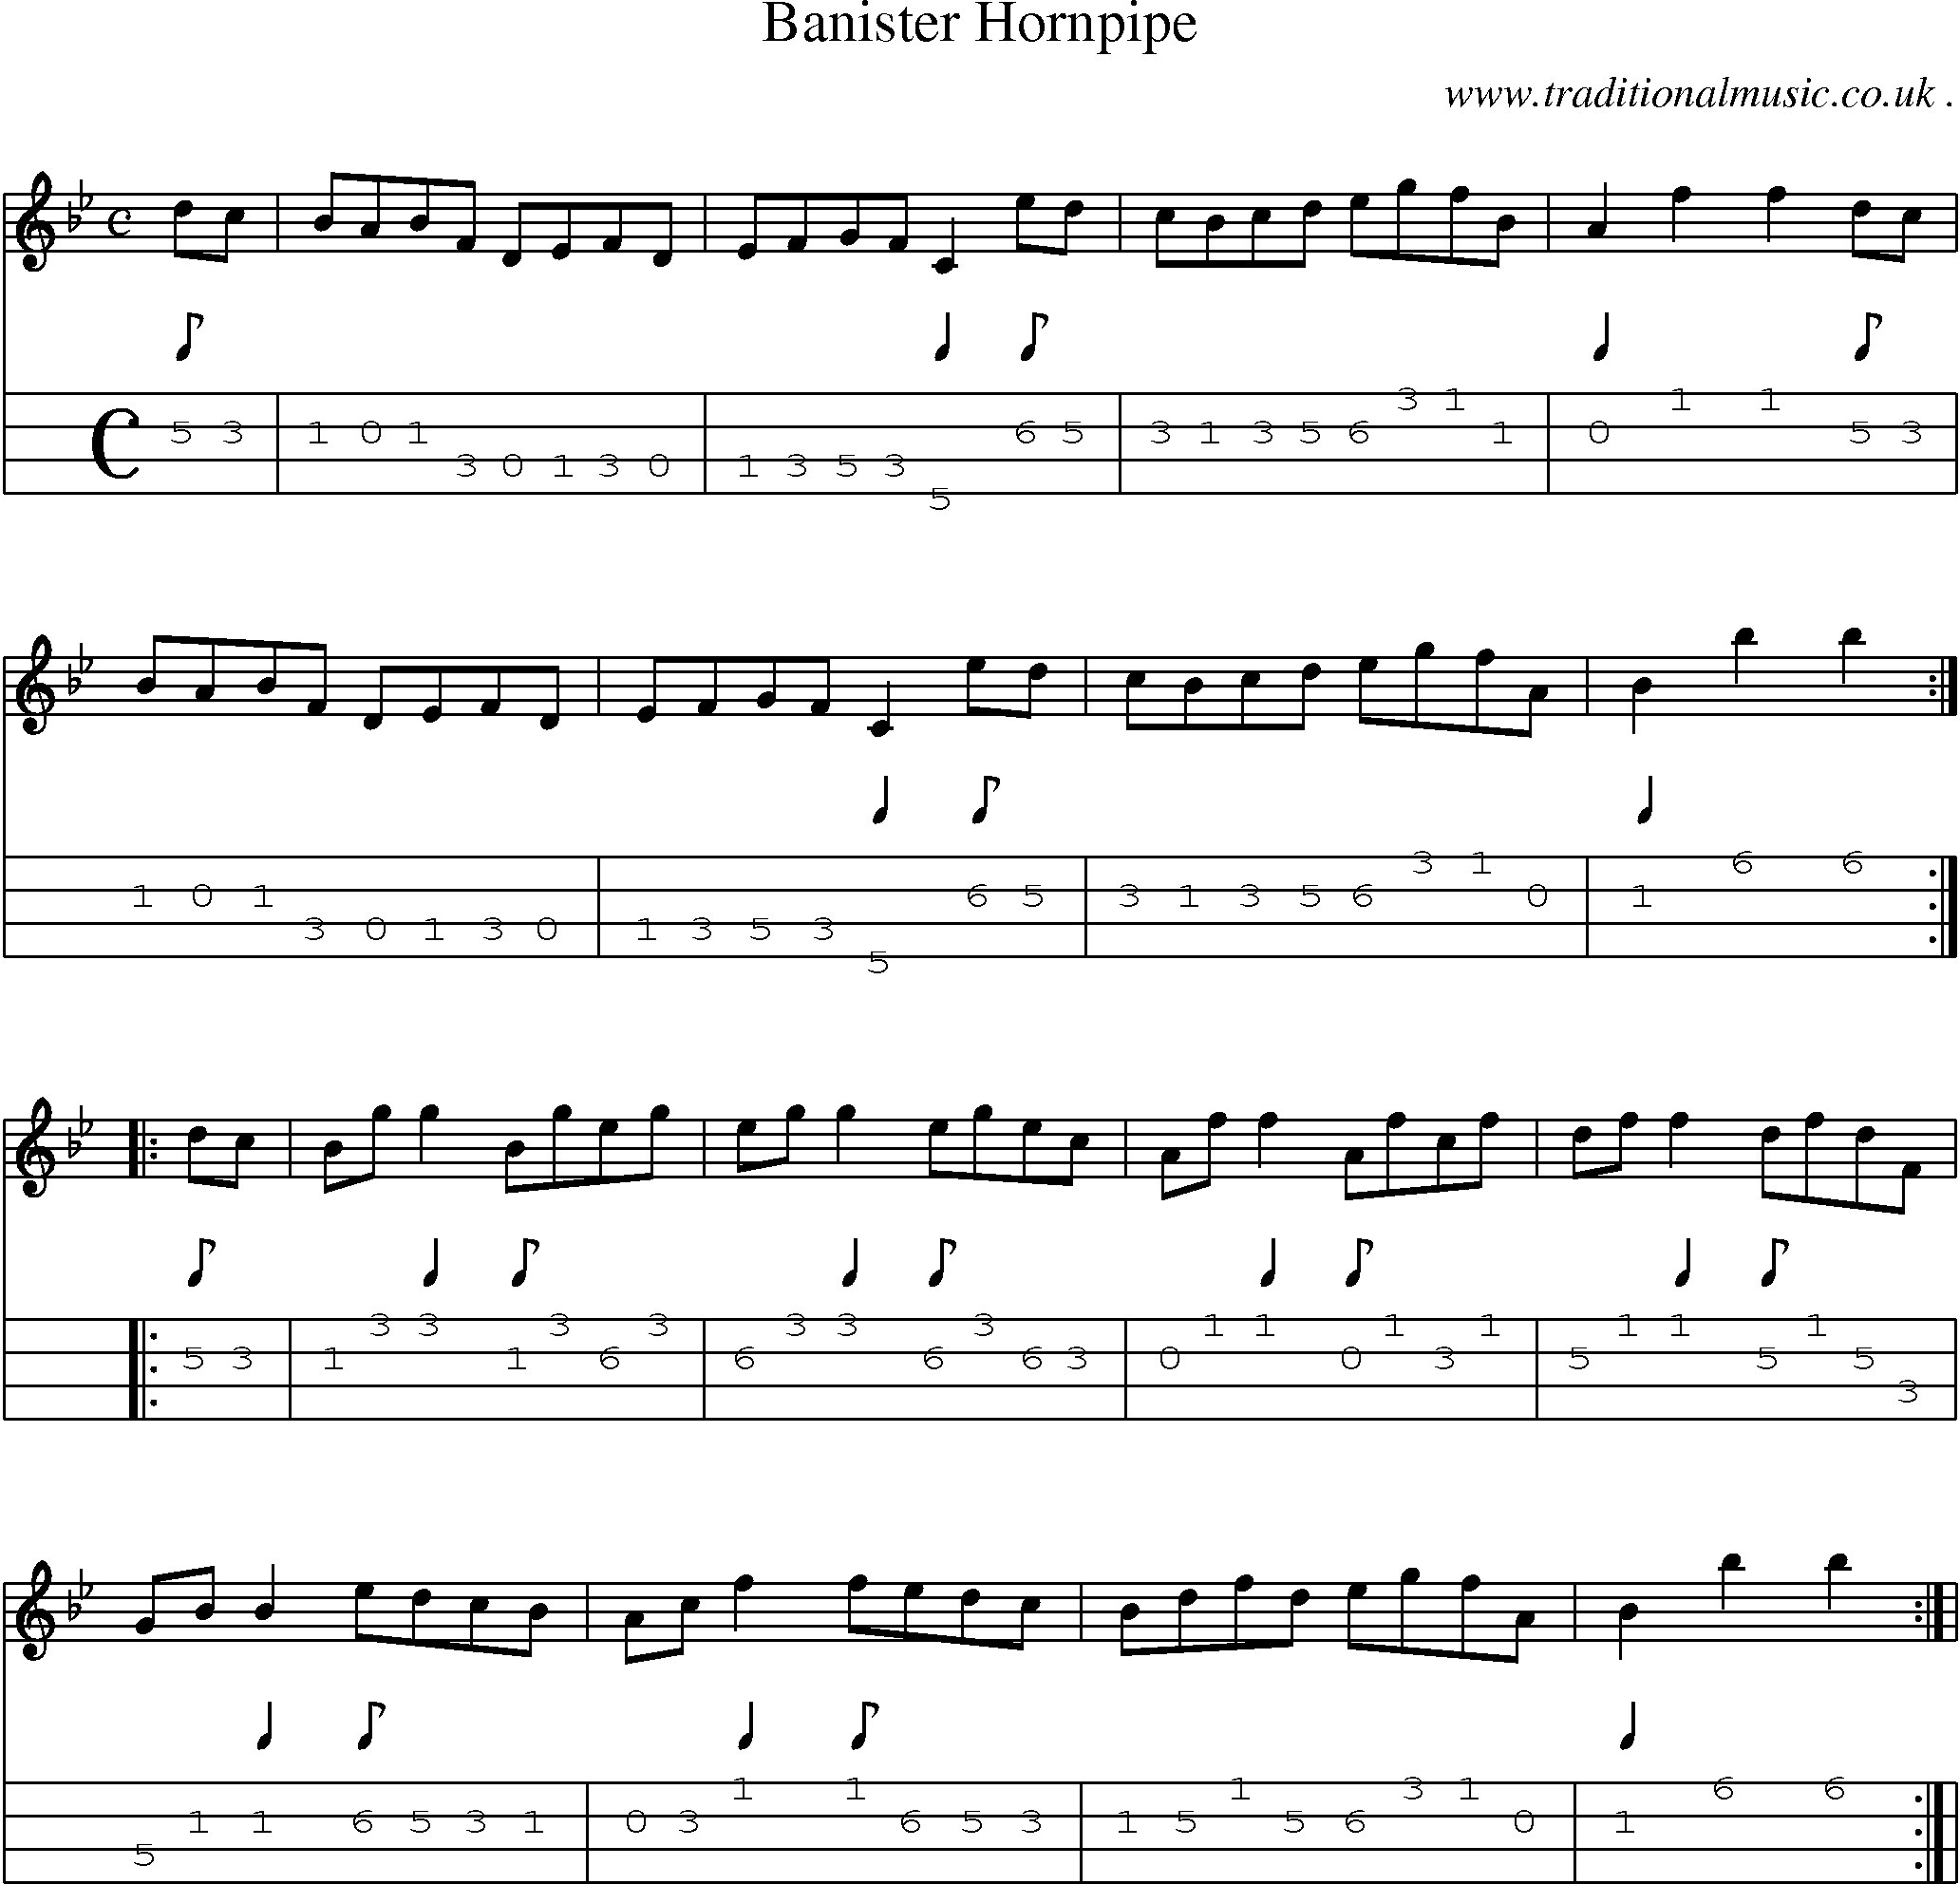 Sheet-Music and Mandolin Tabs for Banister Hornpipe